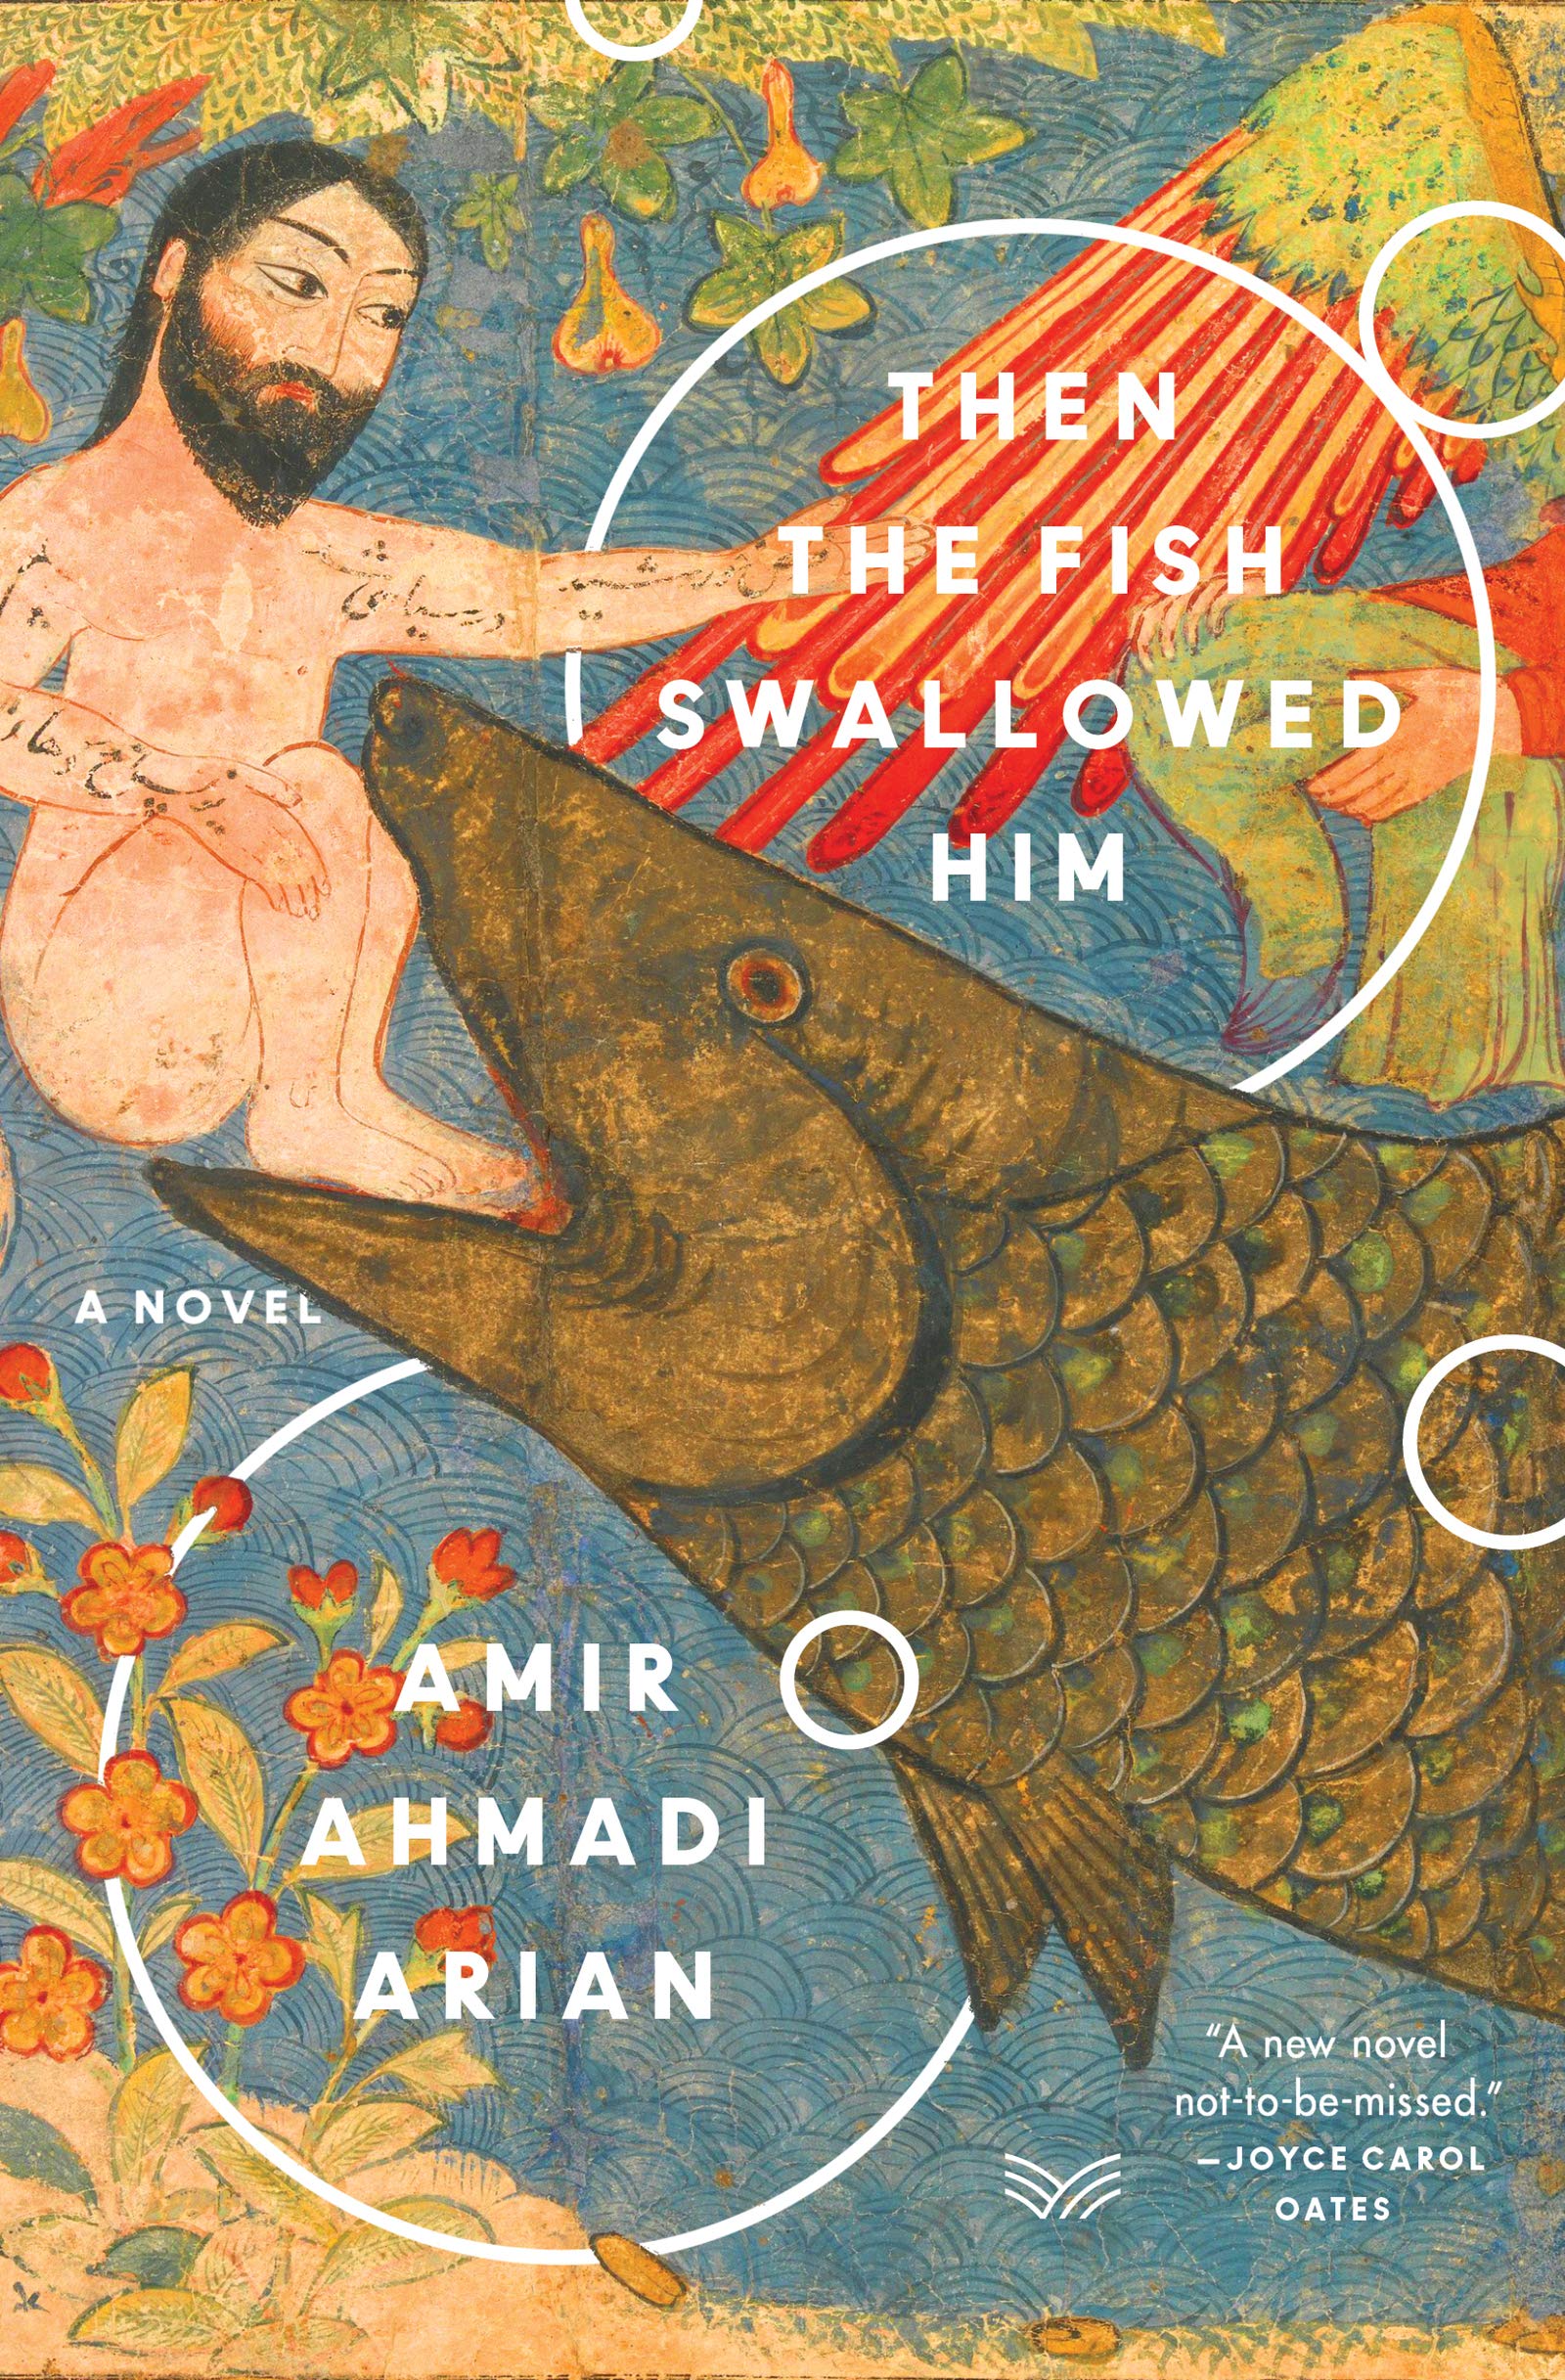 Review: Then the Fish Swallowed Him by Amir Ahmadi Arian